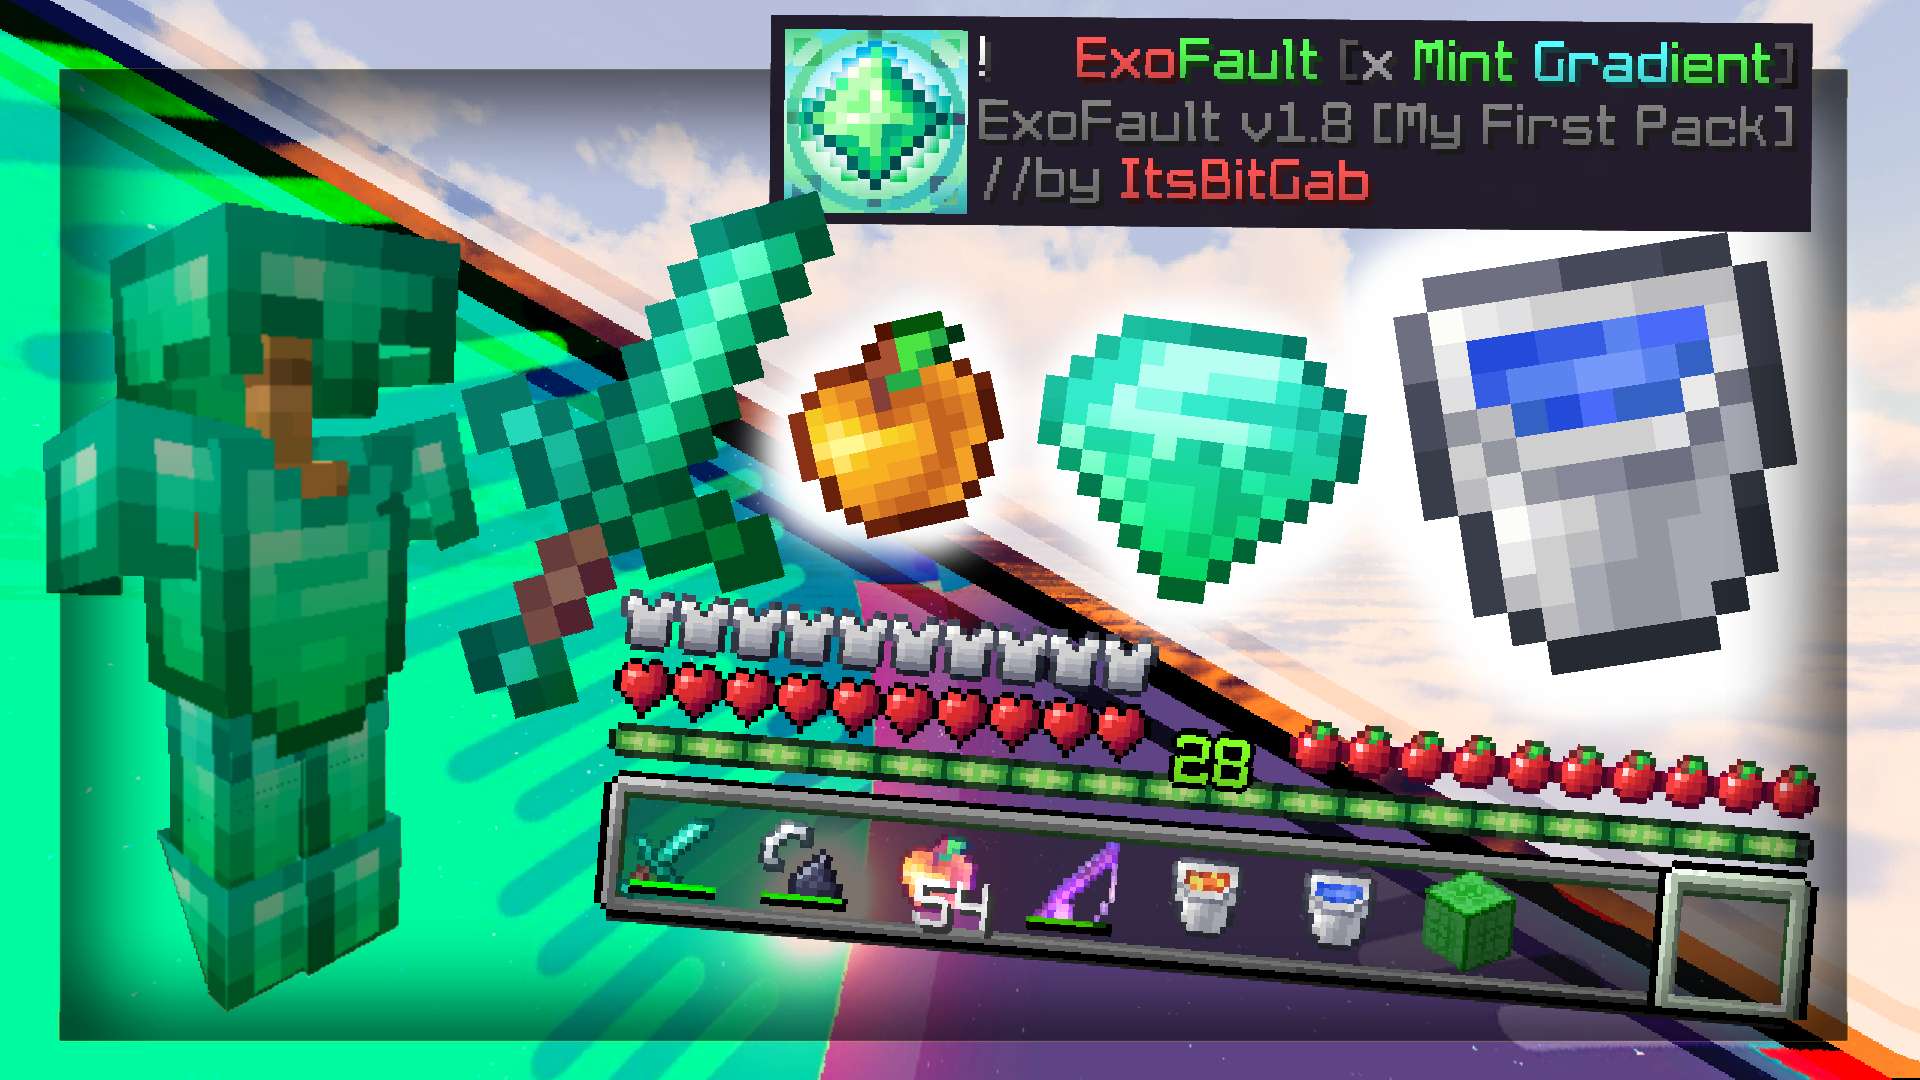 Exofault [x Mint Gradient Recolor] 16x by BitGabHere on PvPRP